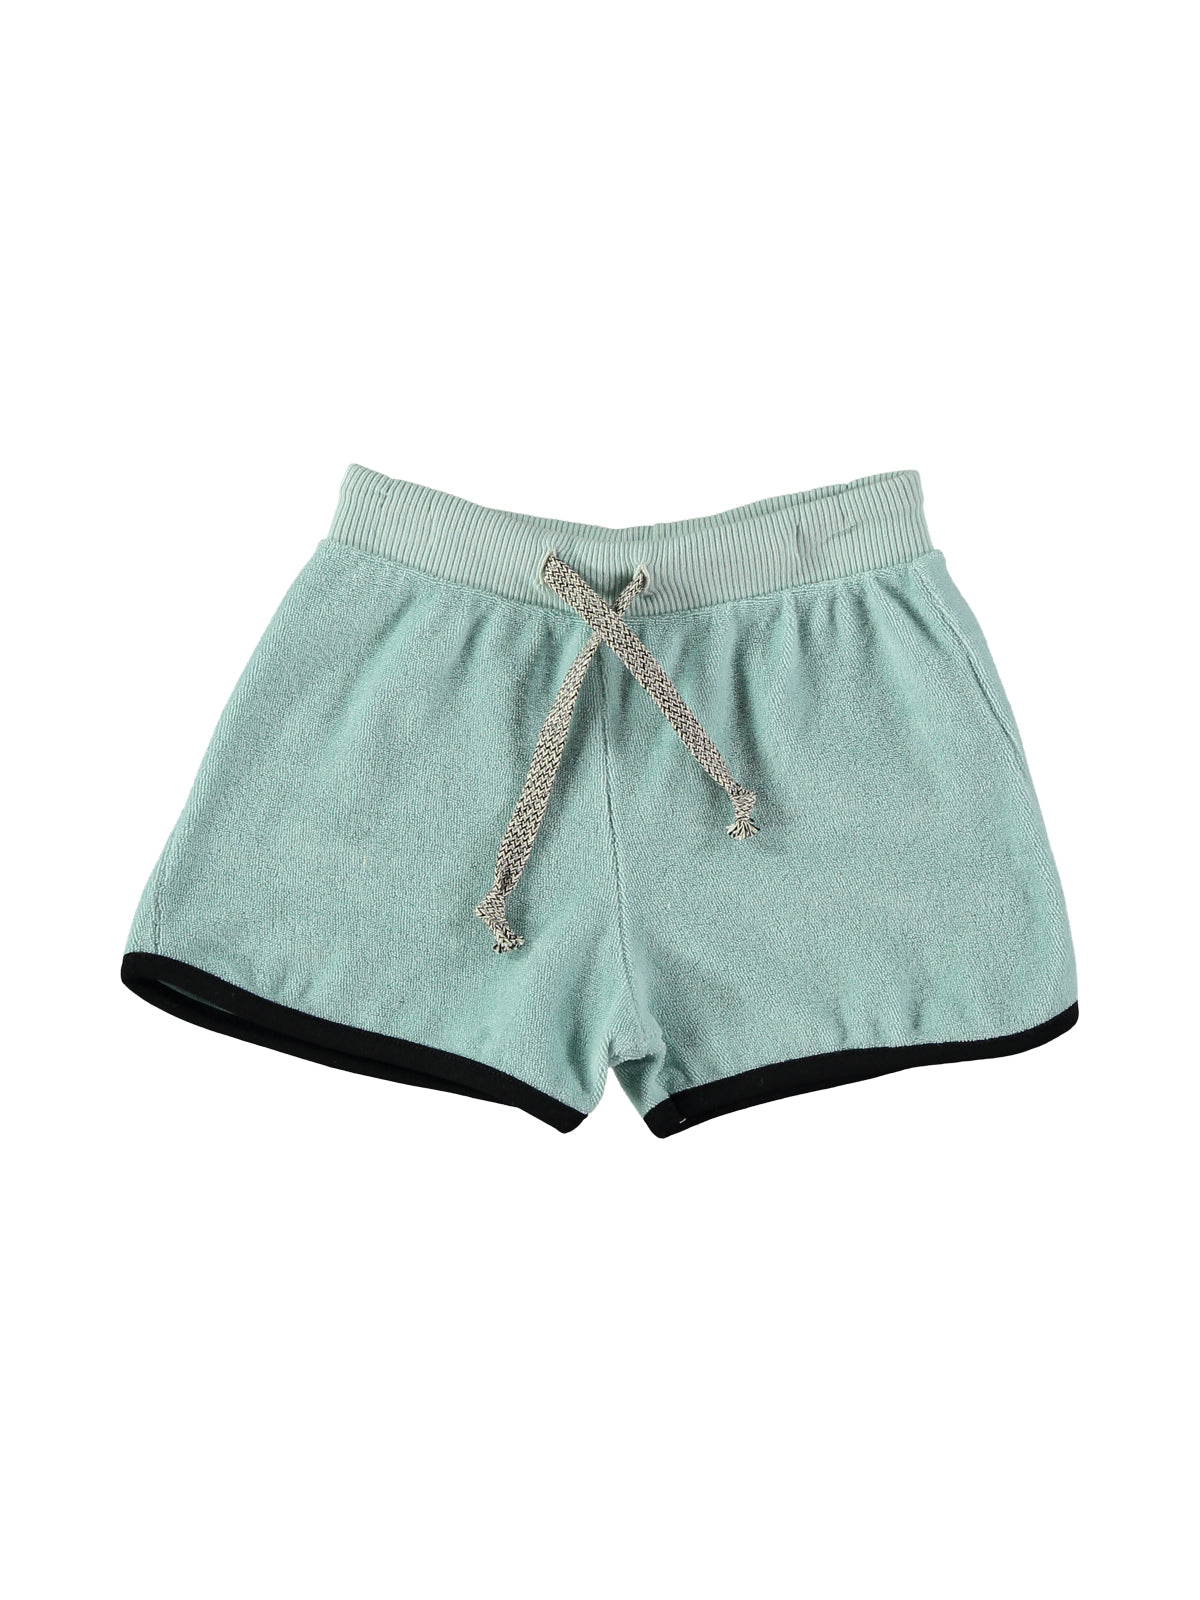 Skuffelse Fugtig Motivere Terry 80's Shorts, Cotton Terry | Danrie